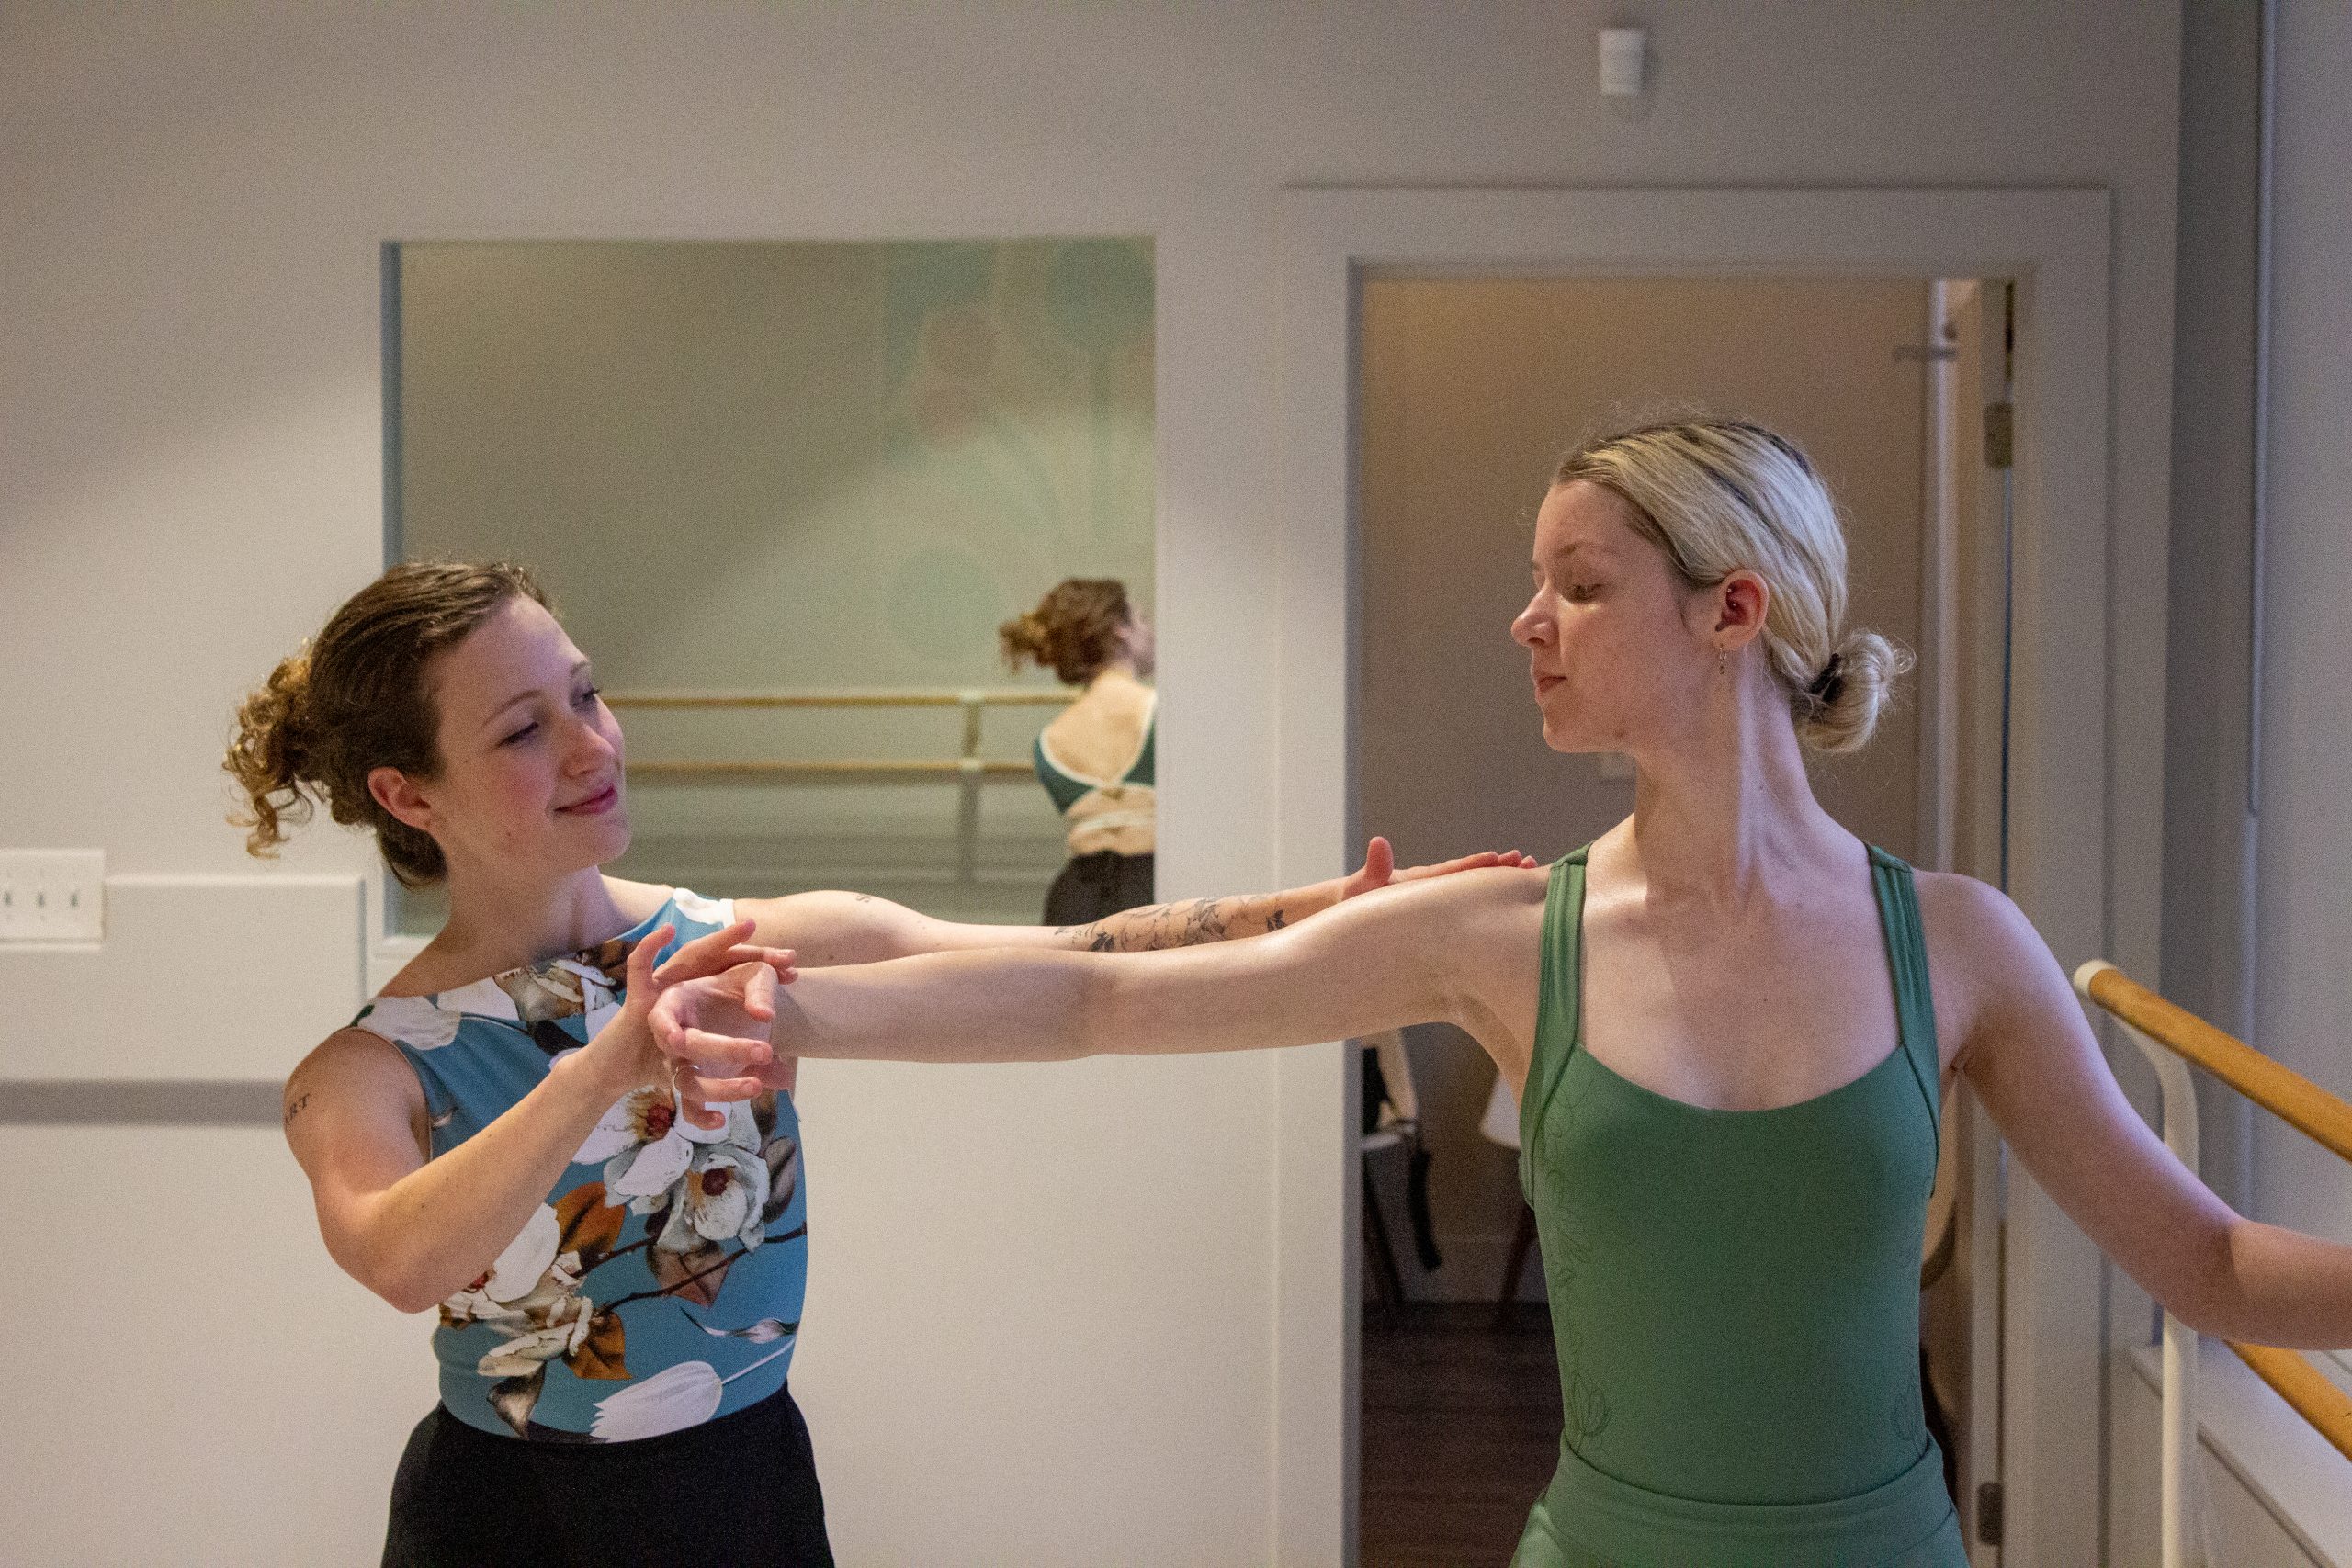 Katie O'Harra instructing her student, Jean Leah, on a barre.